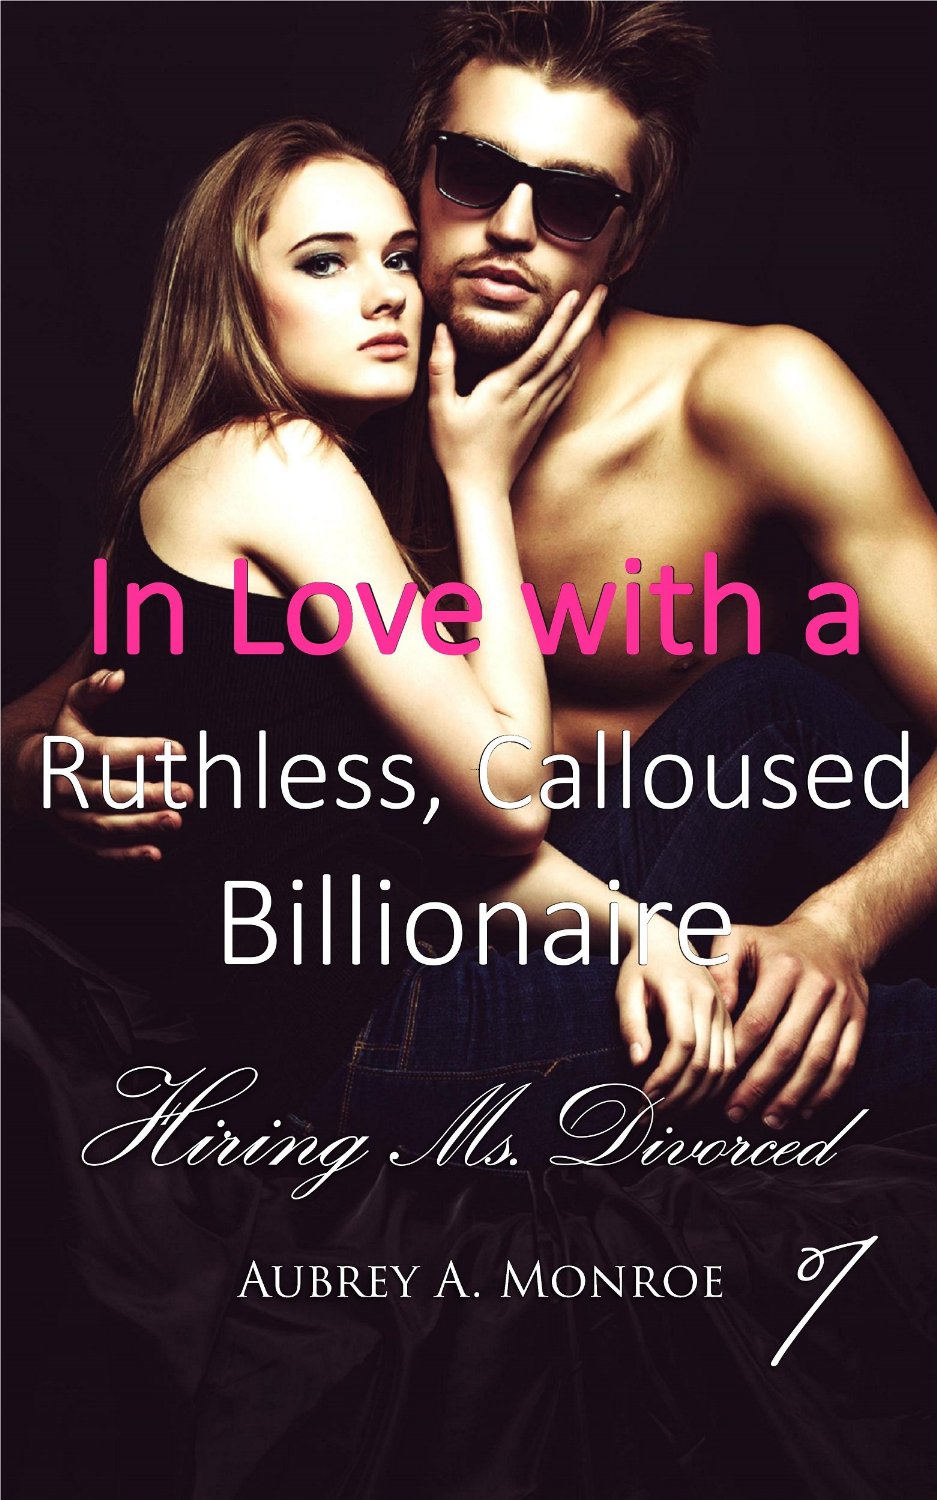 FREE: In Love with a Ruthless, Calloused Billionaire 1 by Aubrey A. Monroe